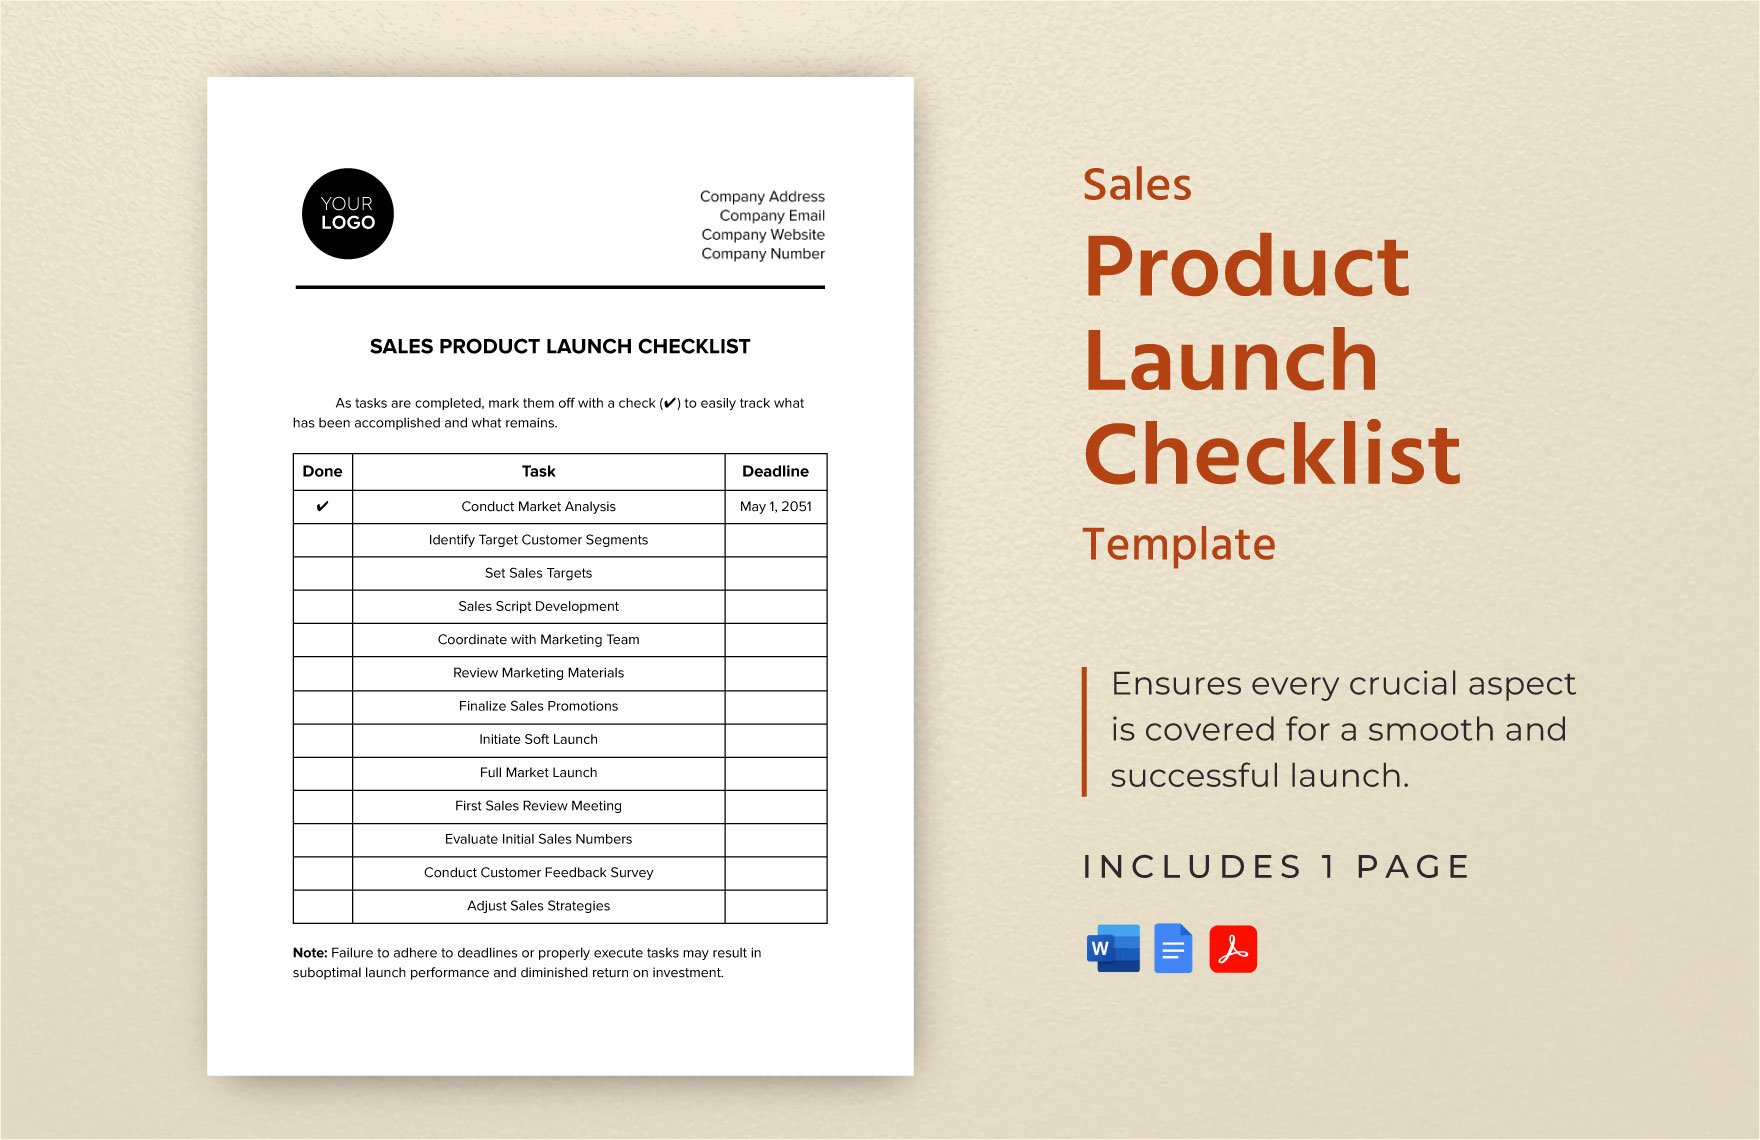 Sales Product Launch Checklist Template in Word, Google Docs, PDF